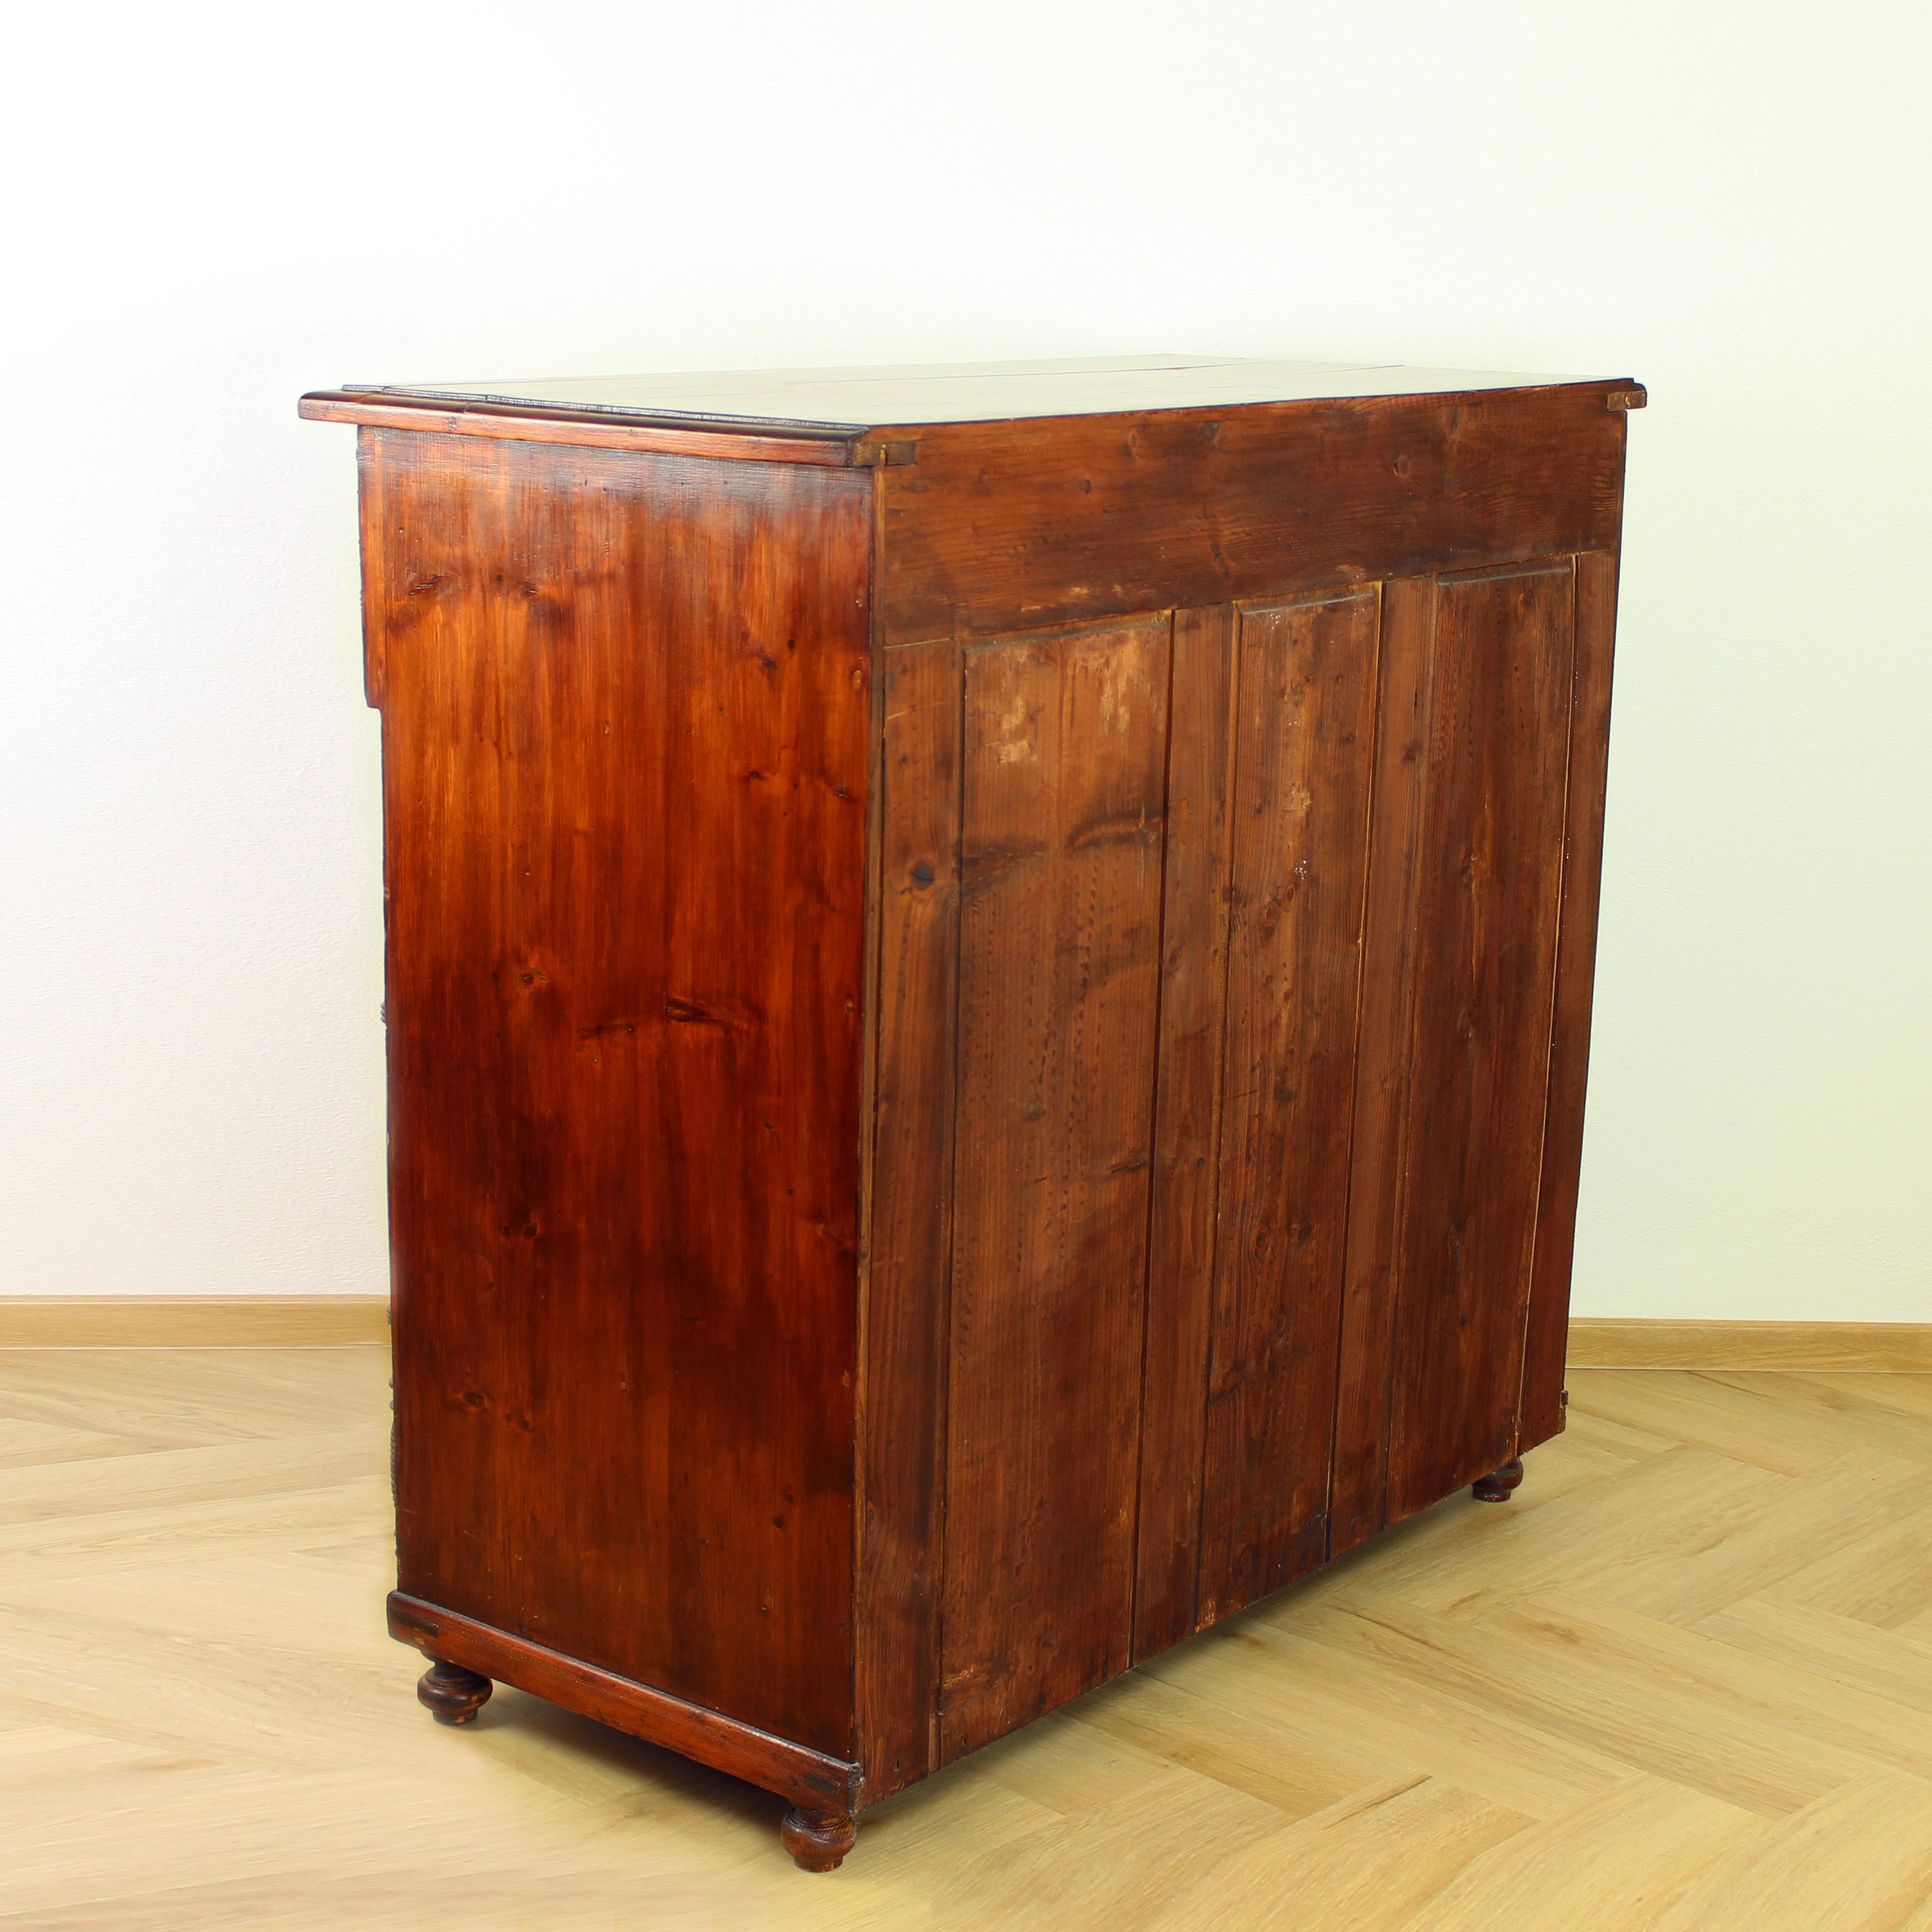 Huge Art Deco Chest Of Drawers, Czechoslovakia 1920s For Sale 6